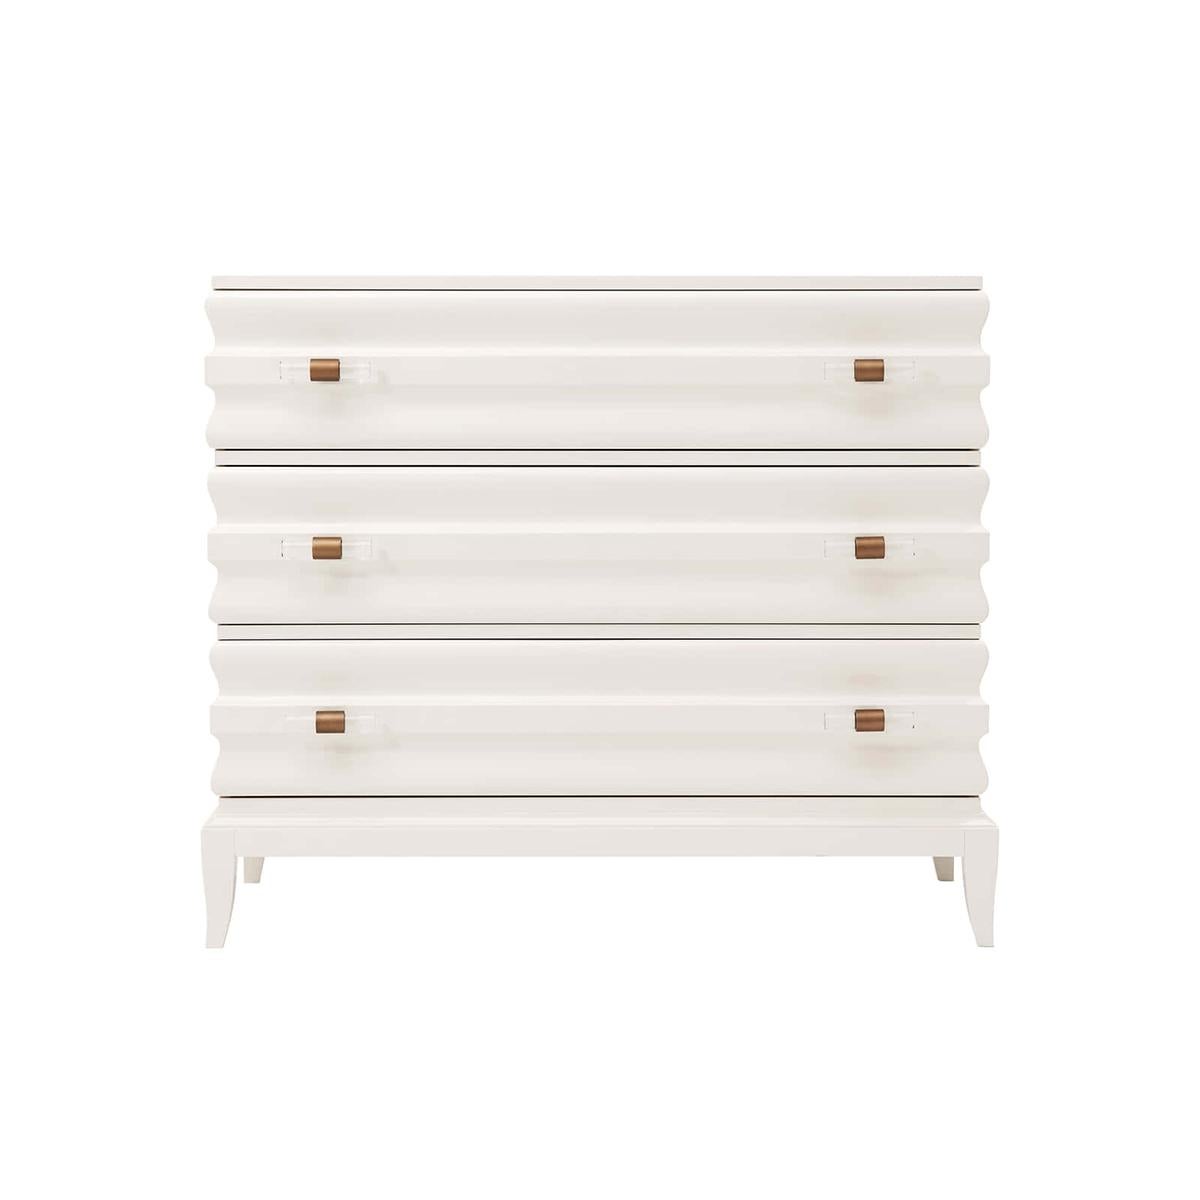 Modern Lacquered Ribbed Commode with a high gloss pearl finish, the rectangular top above ribbed or an ogee molded case and drawers with bronze finish handles clasping optical glass batons, the case raised on splayed saber legs.
Dimensions: 42.5